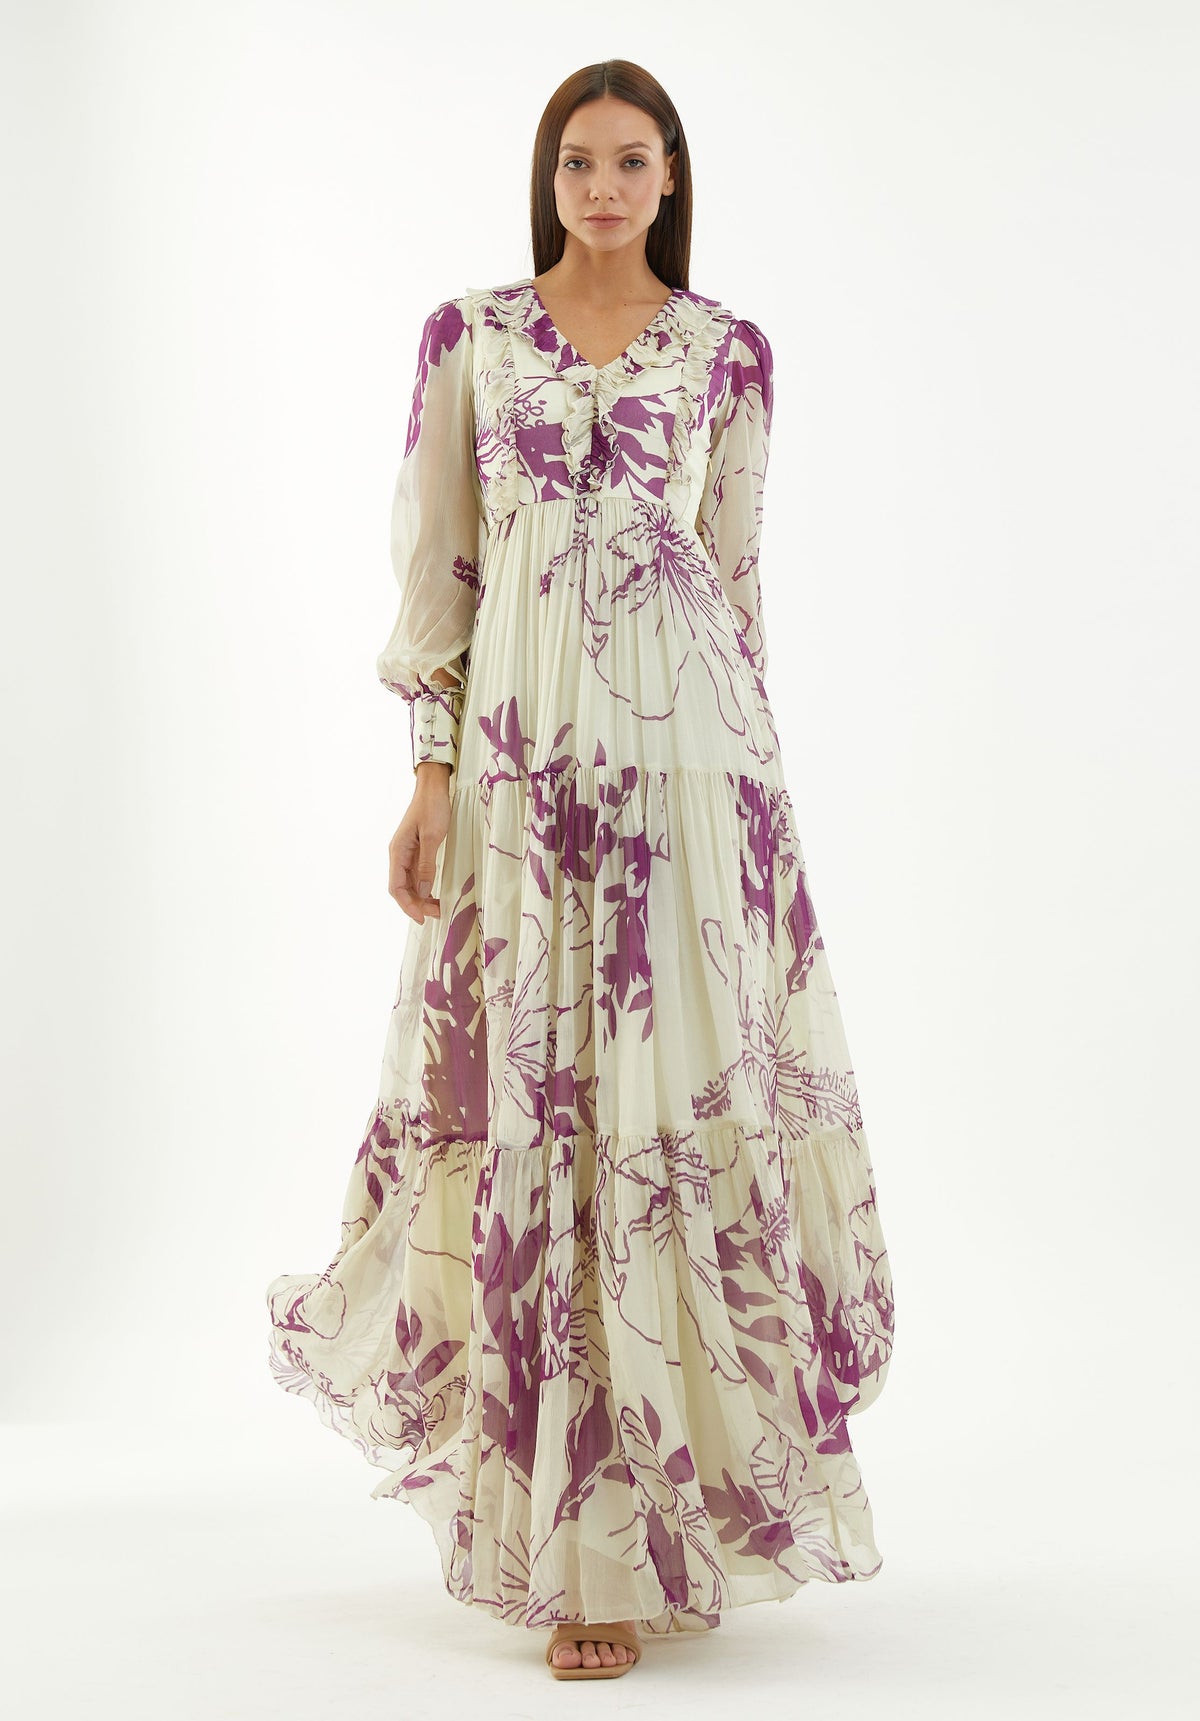 WHITE AND PURPLE FLORAL LONG DRESS